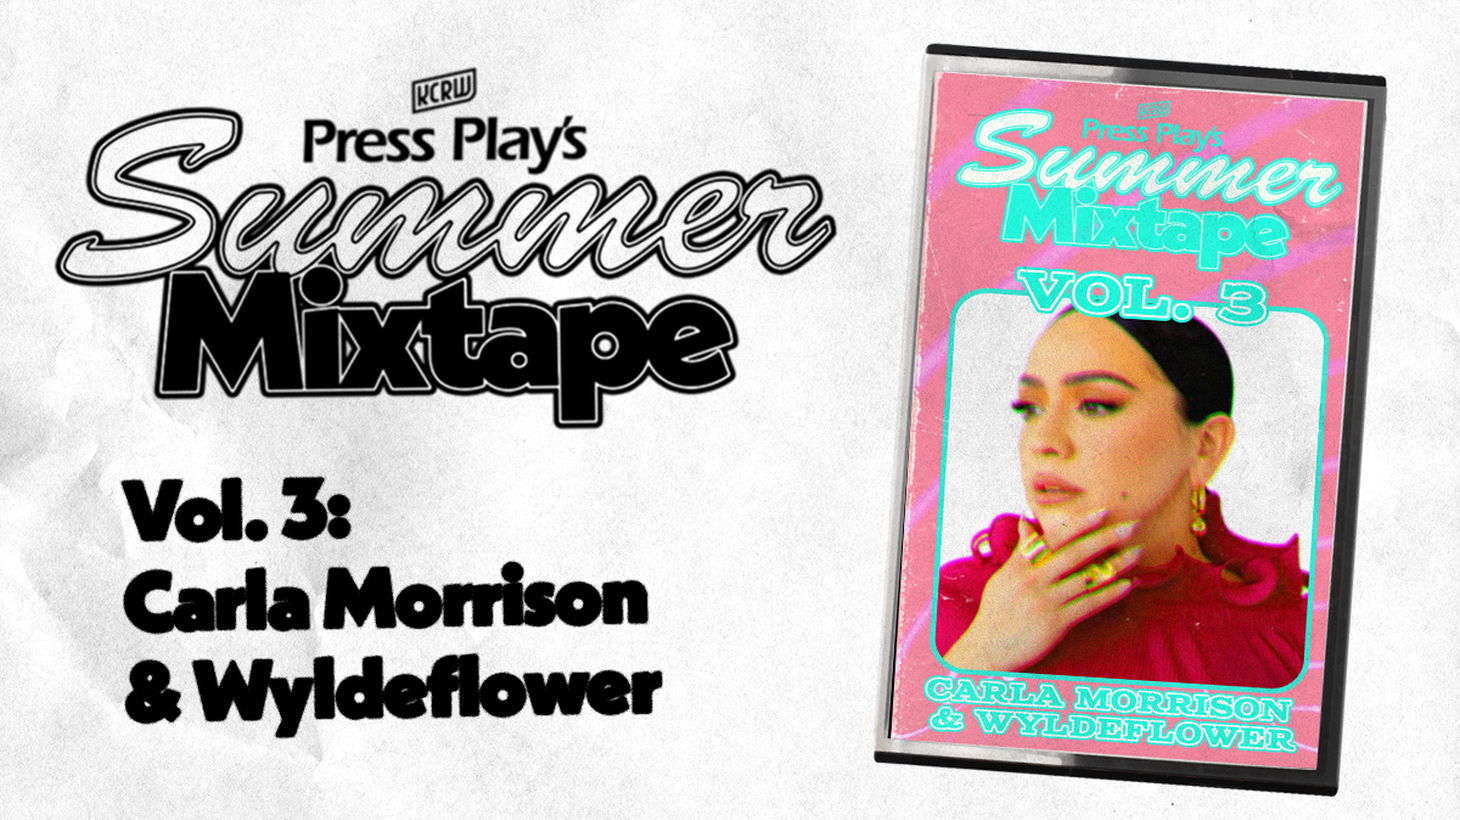 The third episode of this year’s Summer Mixtape features Carla Morrison and Ro Wyldeflower Contreras.